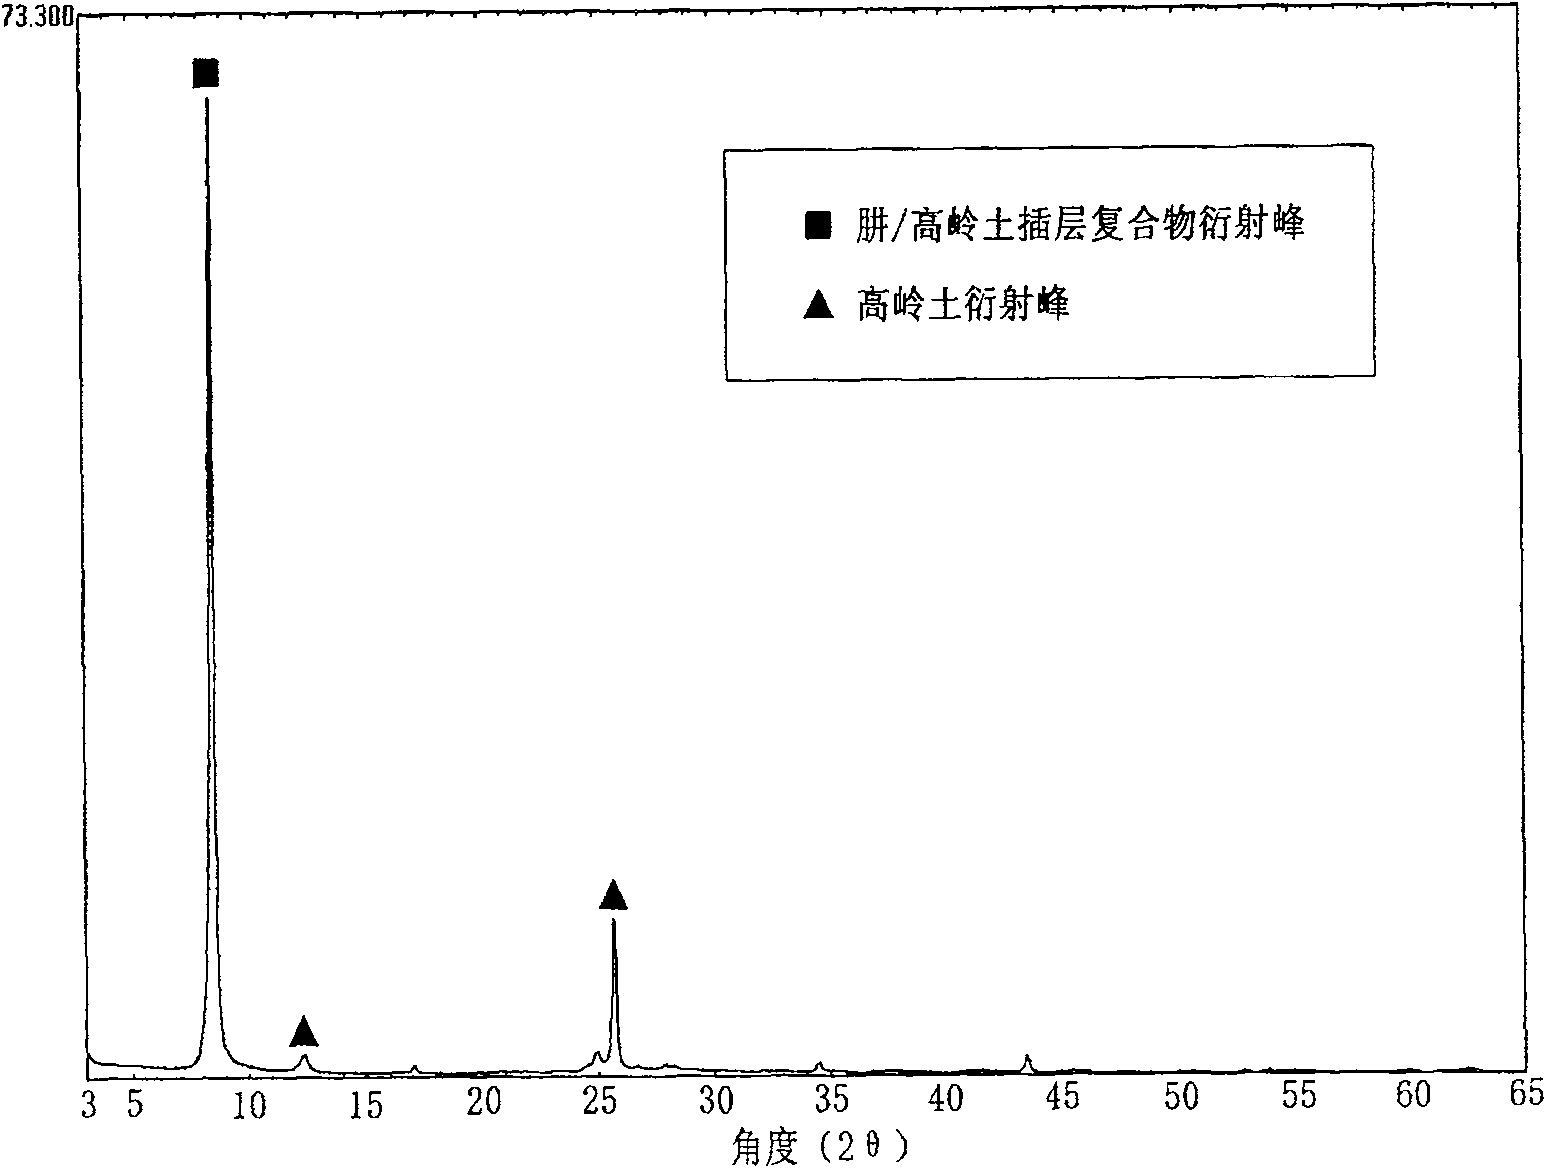 Method for preparing octadecyl amine/kaolin inserted layer composition